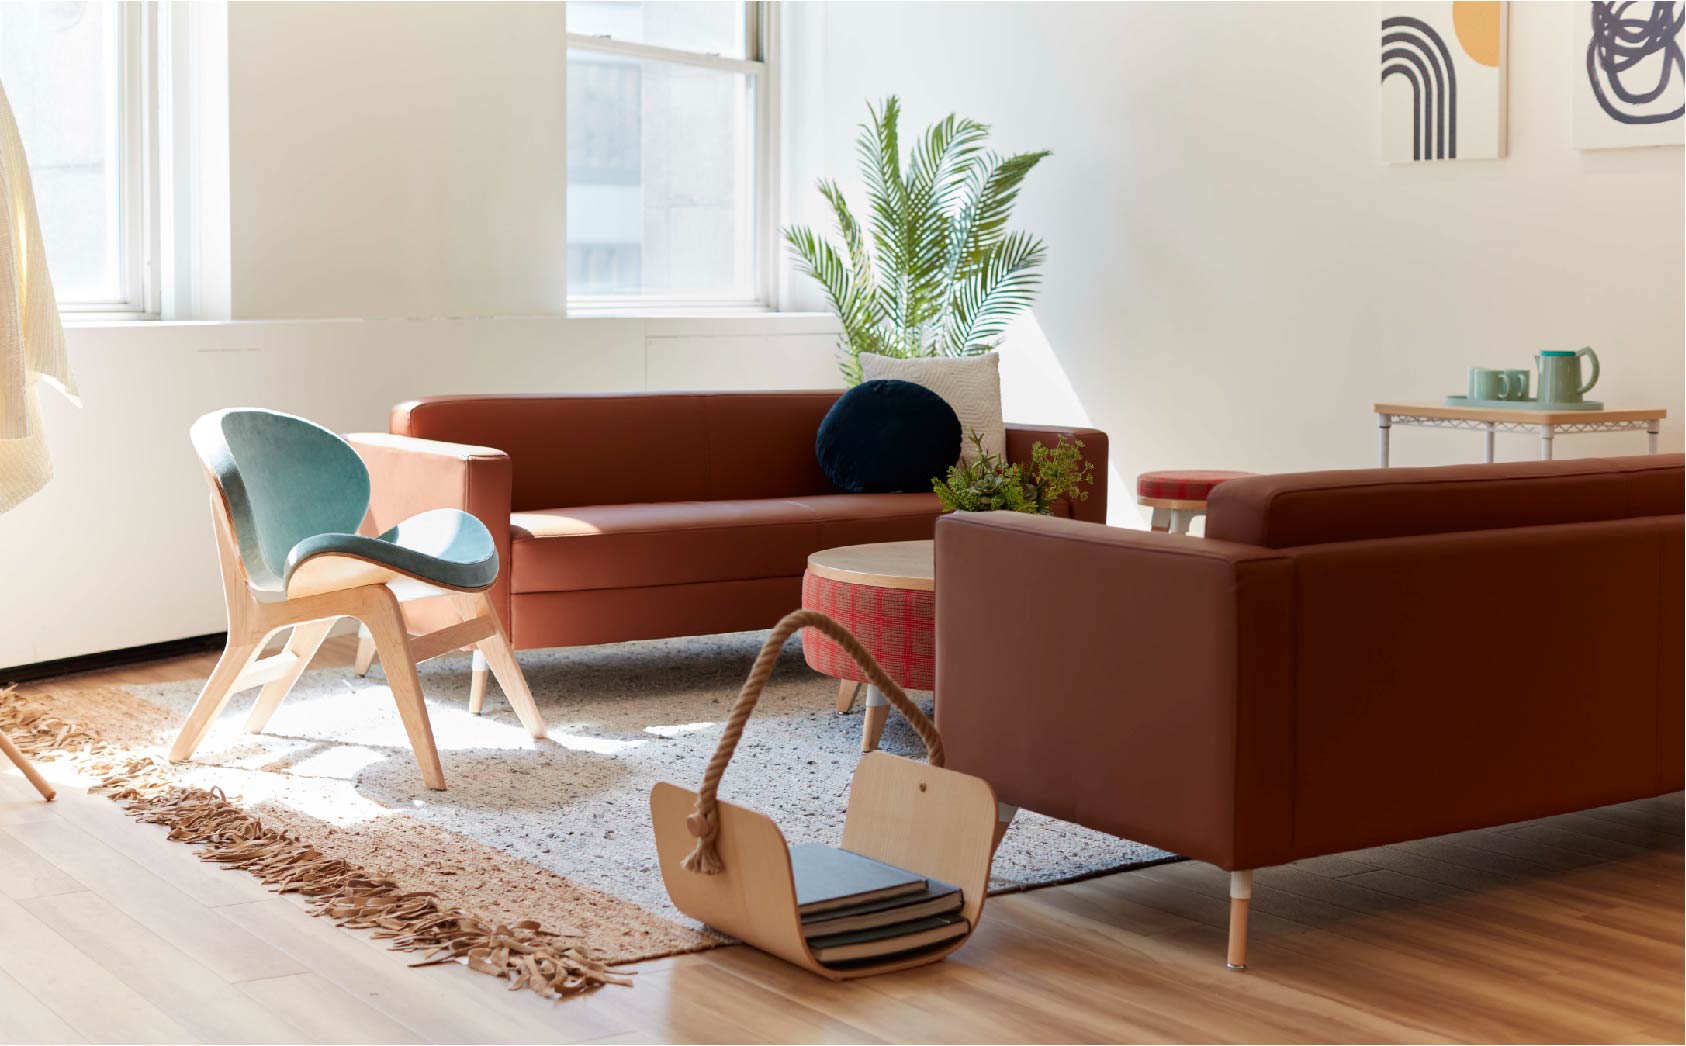 Image shows a lounge space with two brown sofas facing each other and stylish blue chair facing the couches